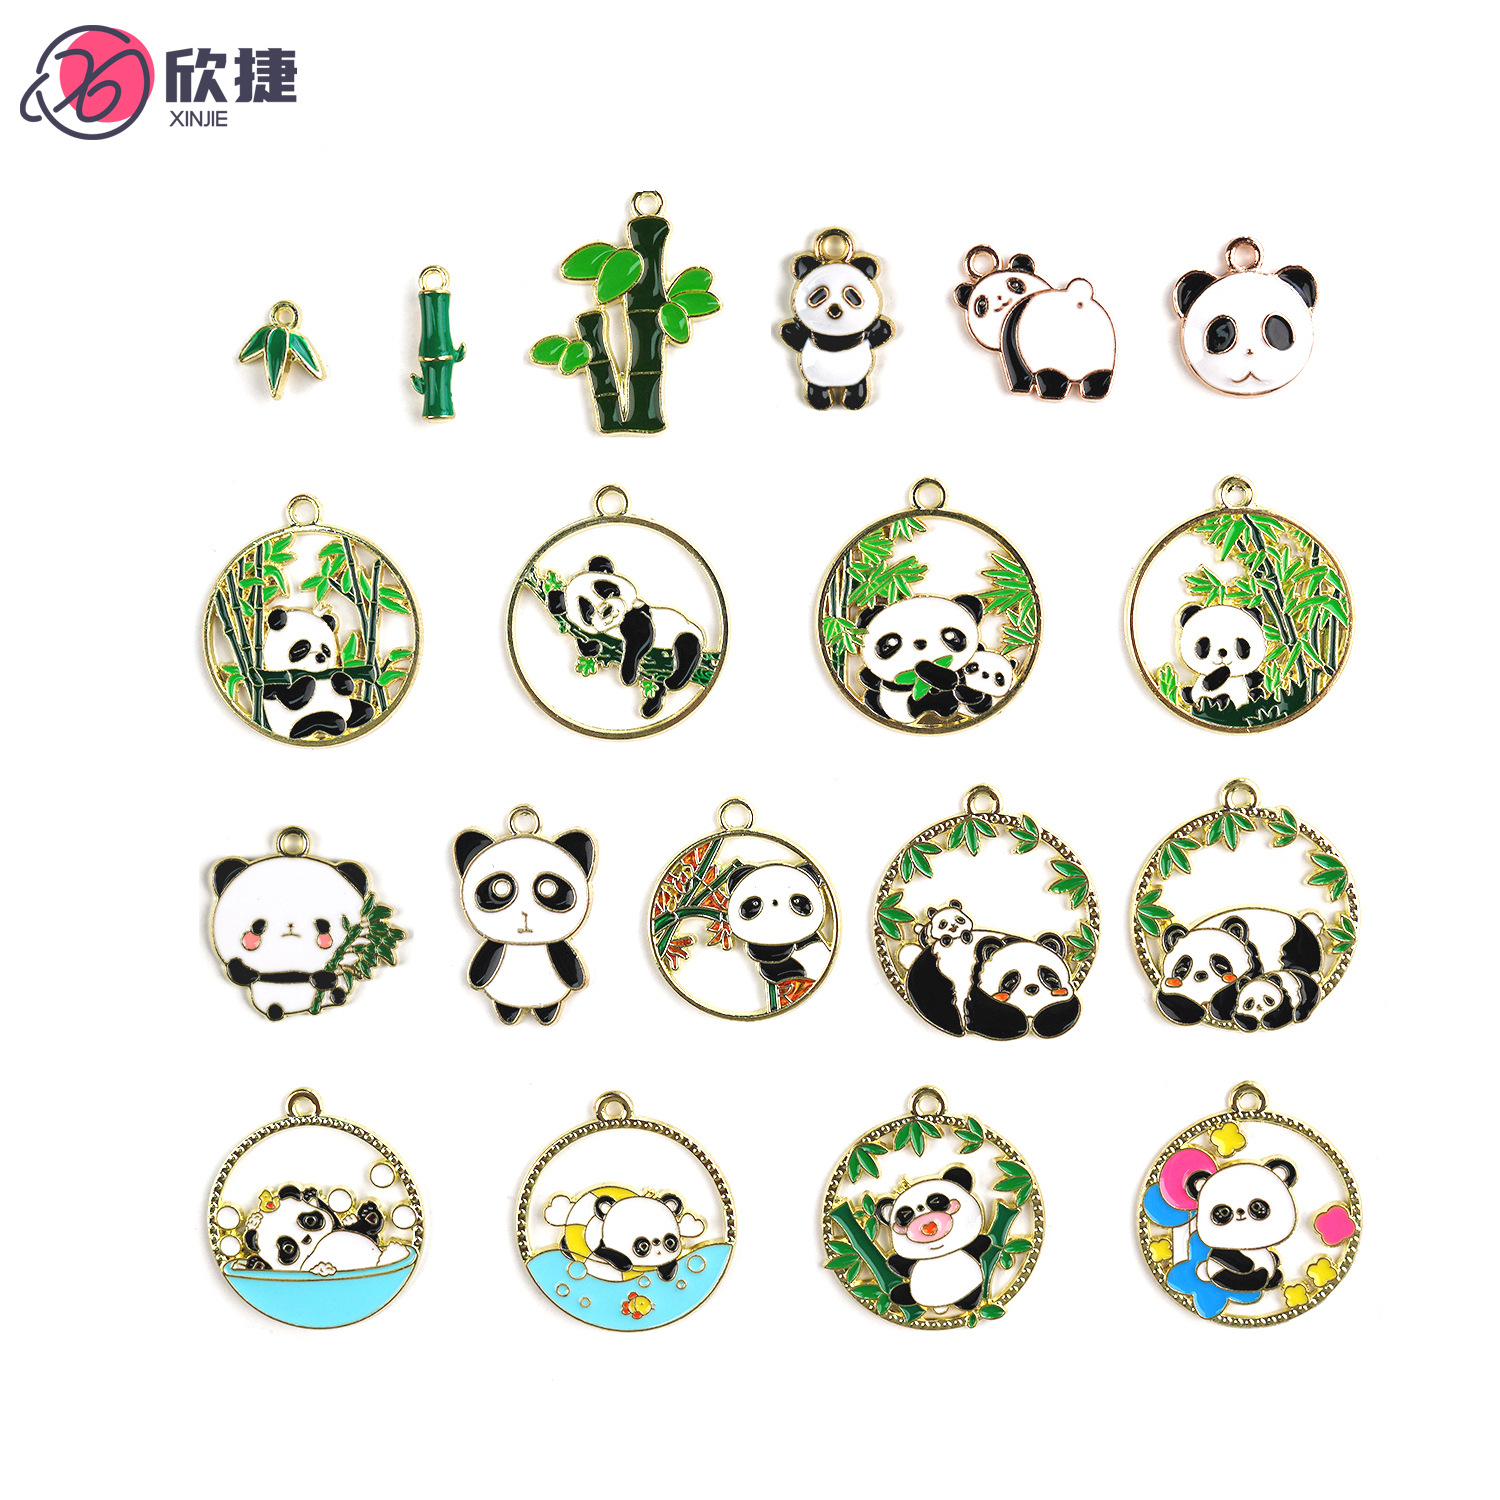 bamboo bamboo leaf cute panda diy alloy dripping oil ornament accessories national style hair accessories keychain hanging piece pendant